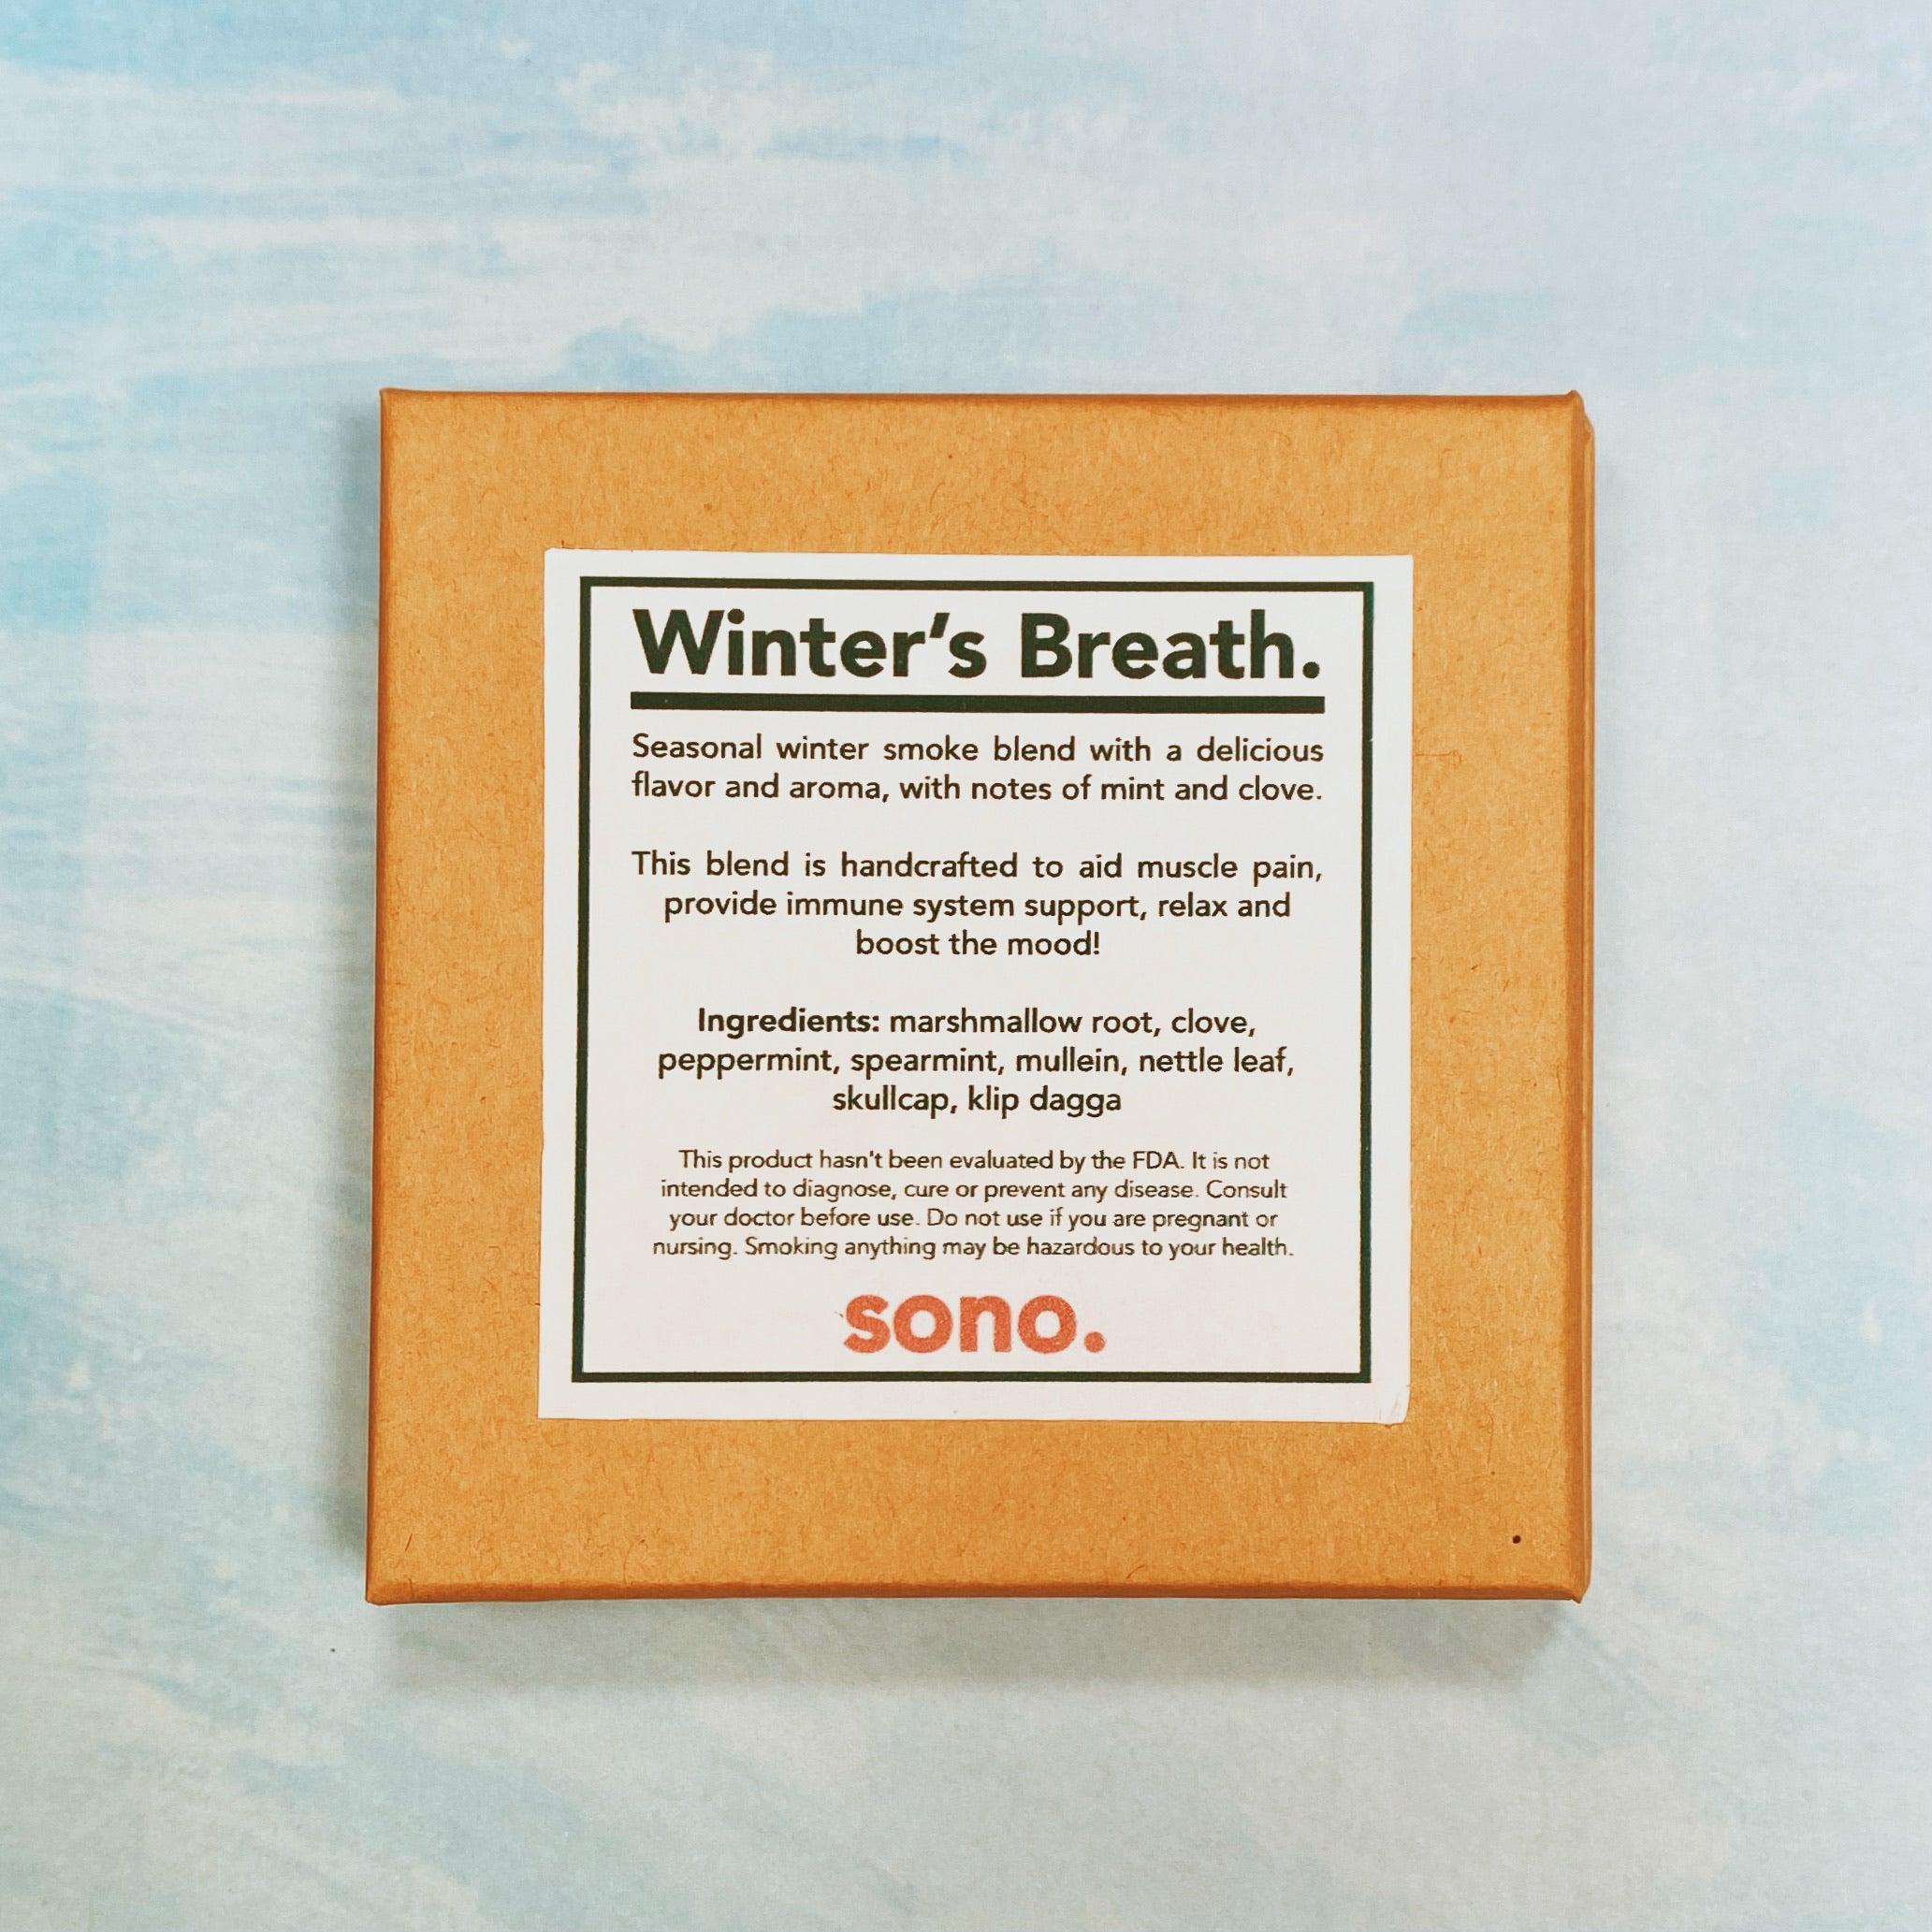 Winter’s Breath. | 10 Smokes w/ Optional D8 THC | Limited Edition Winter Blend